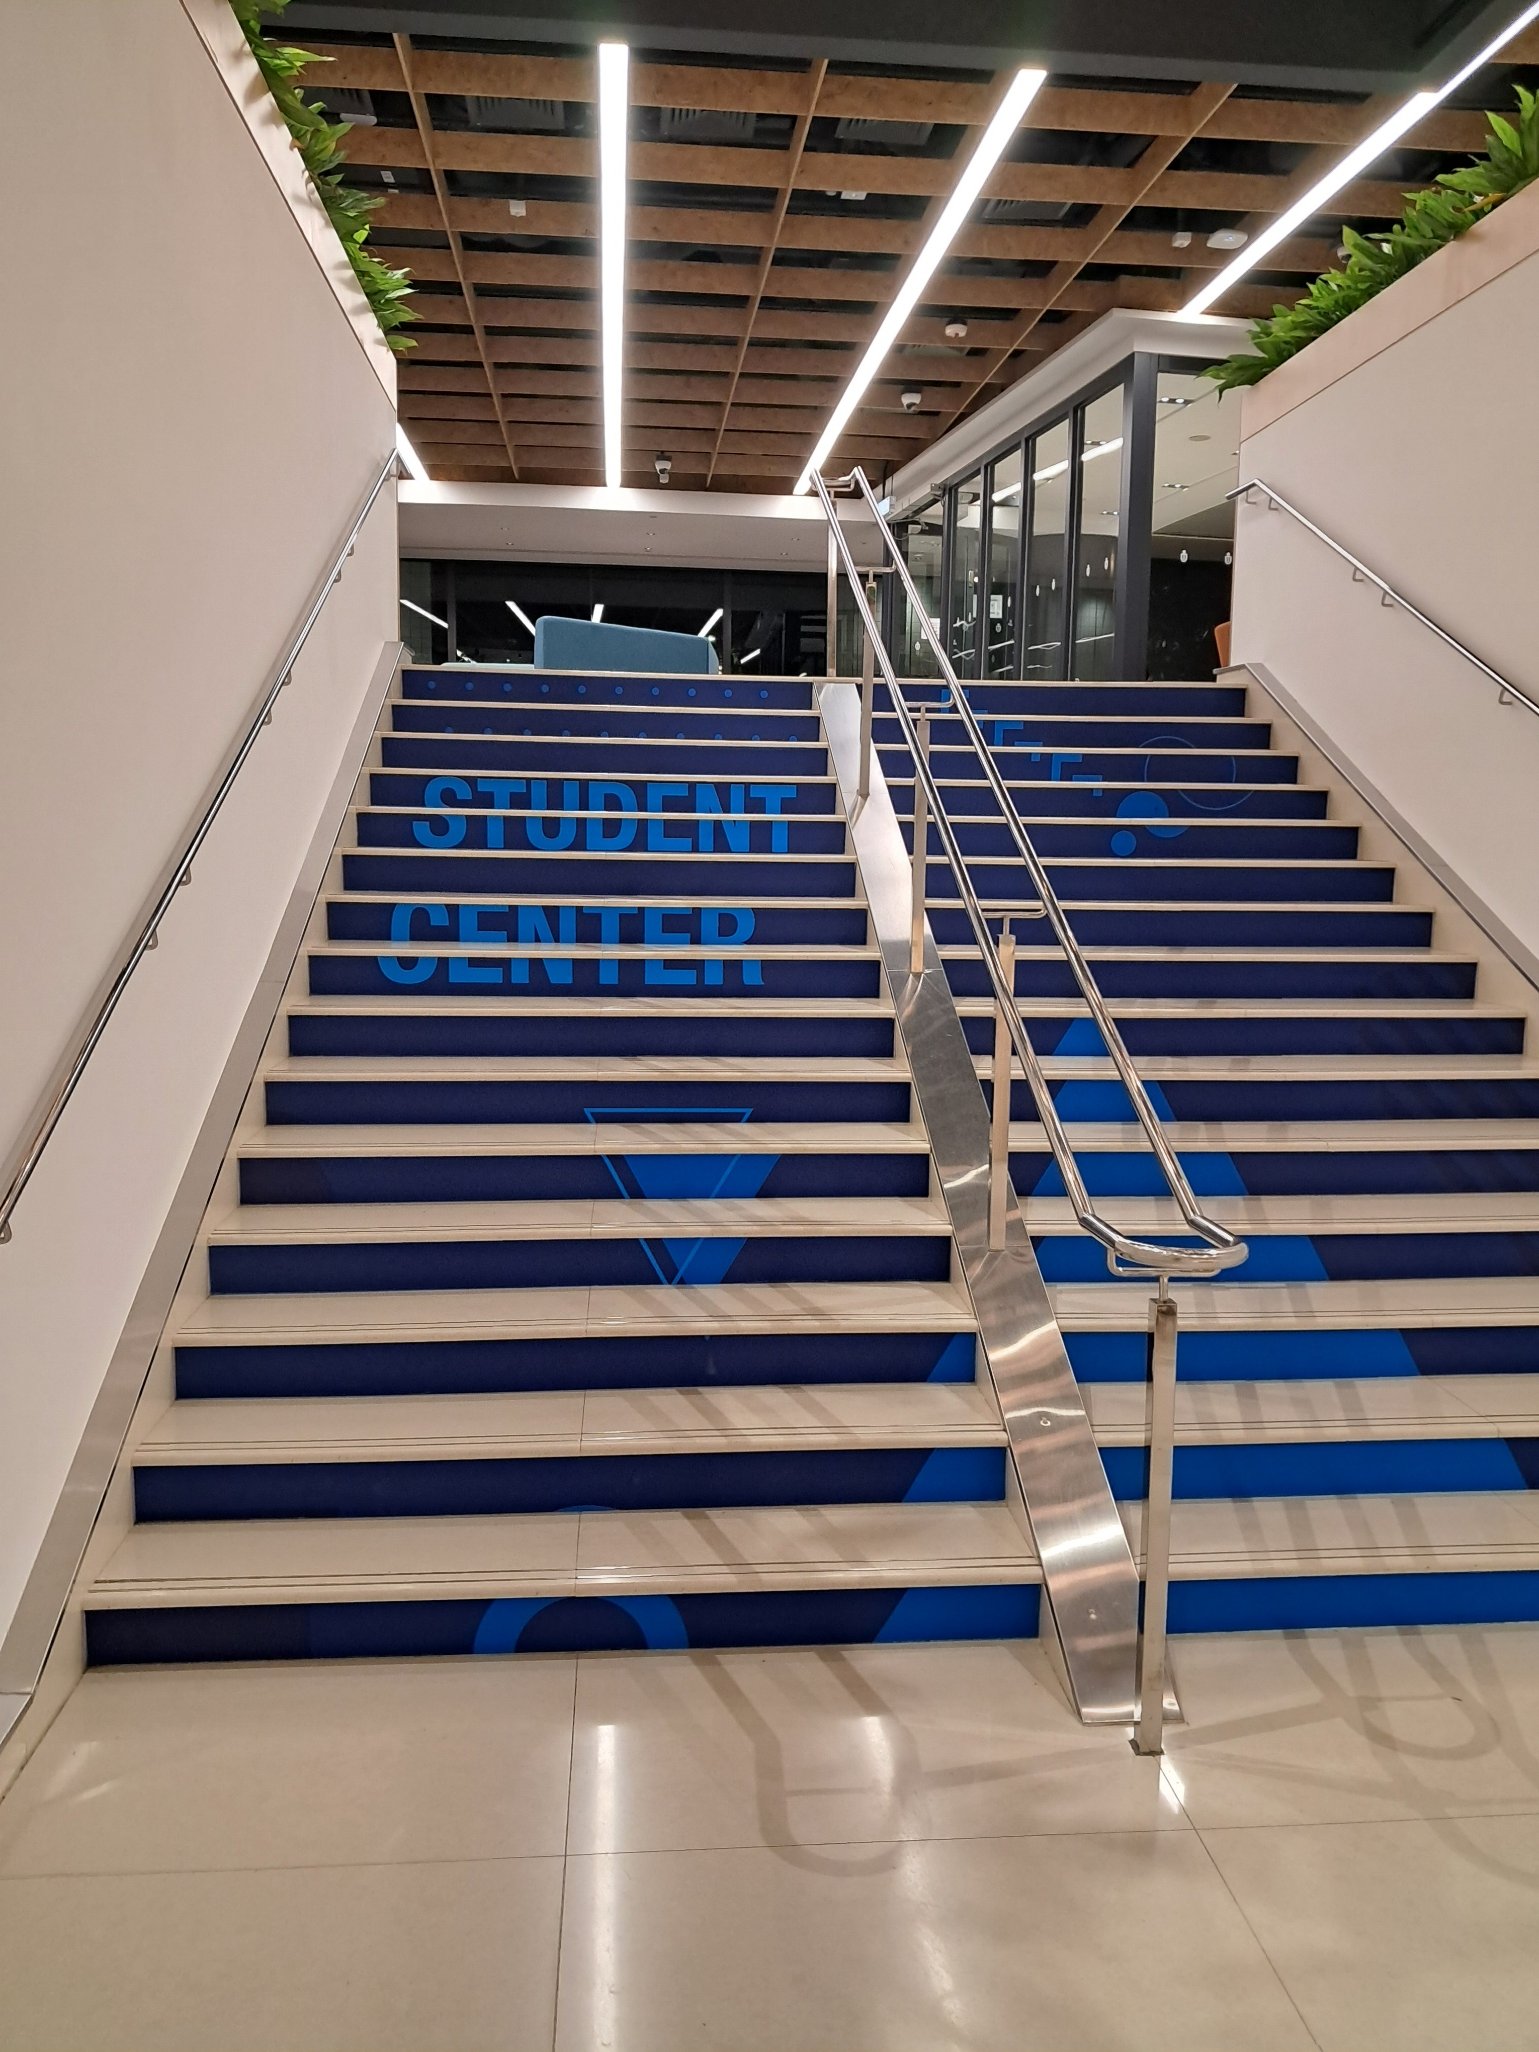 hkust-staircase